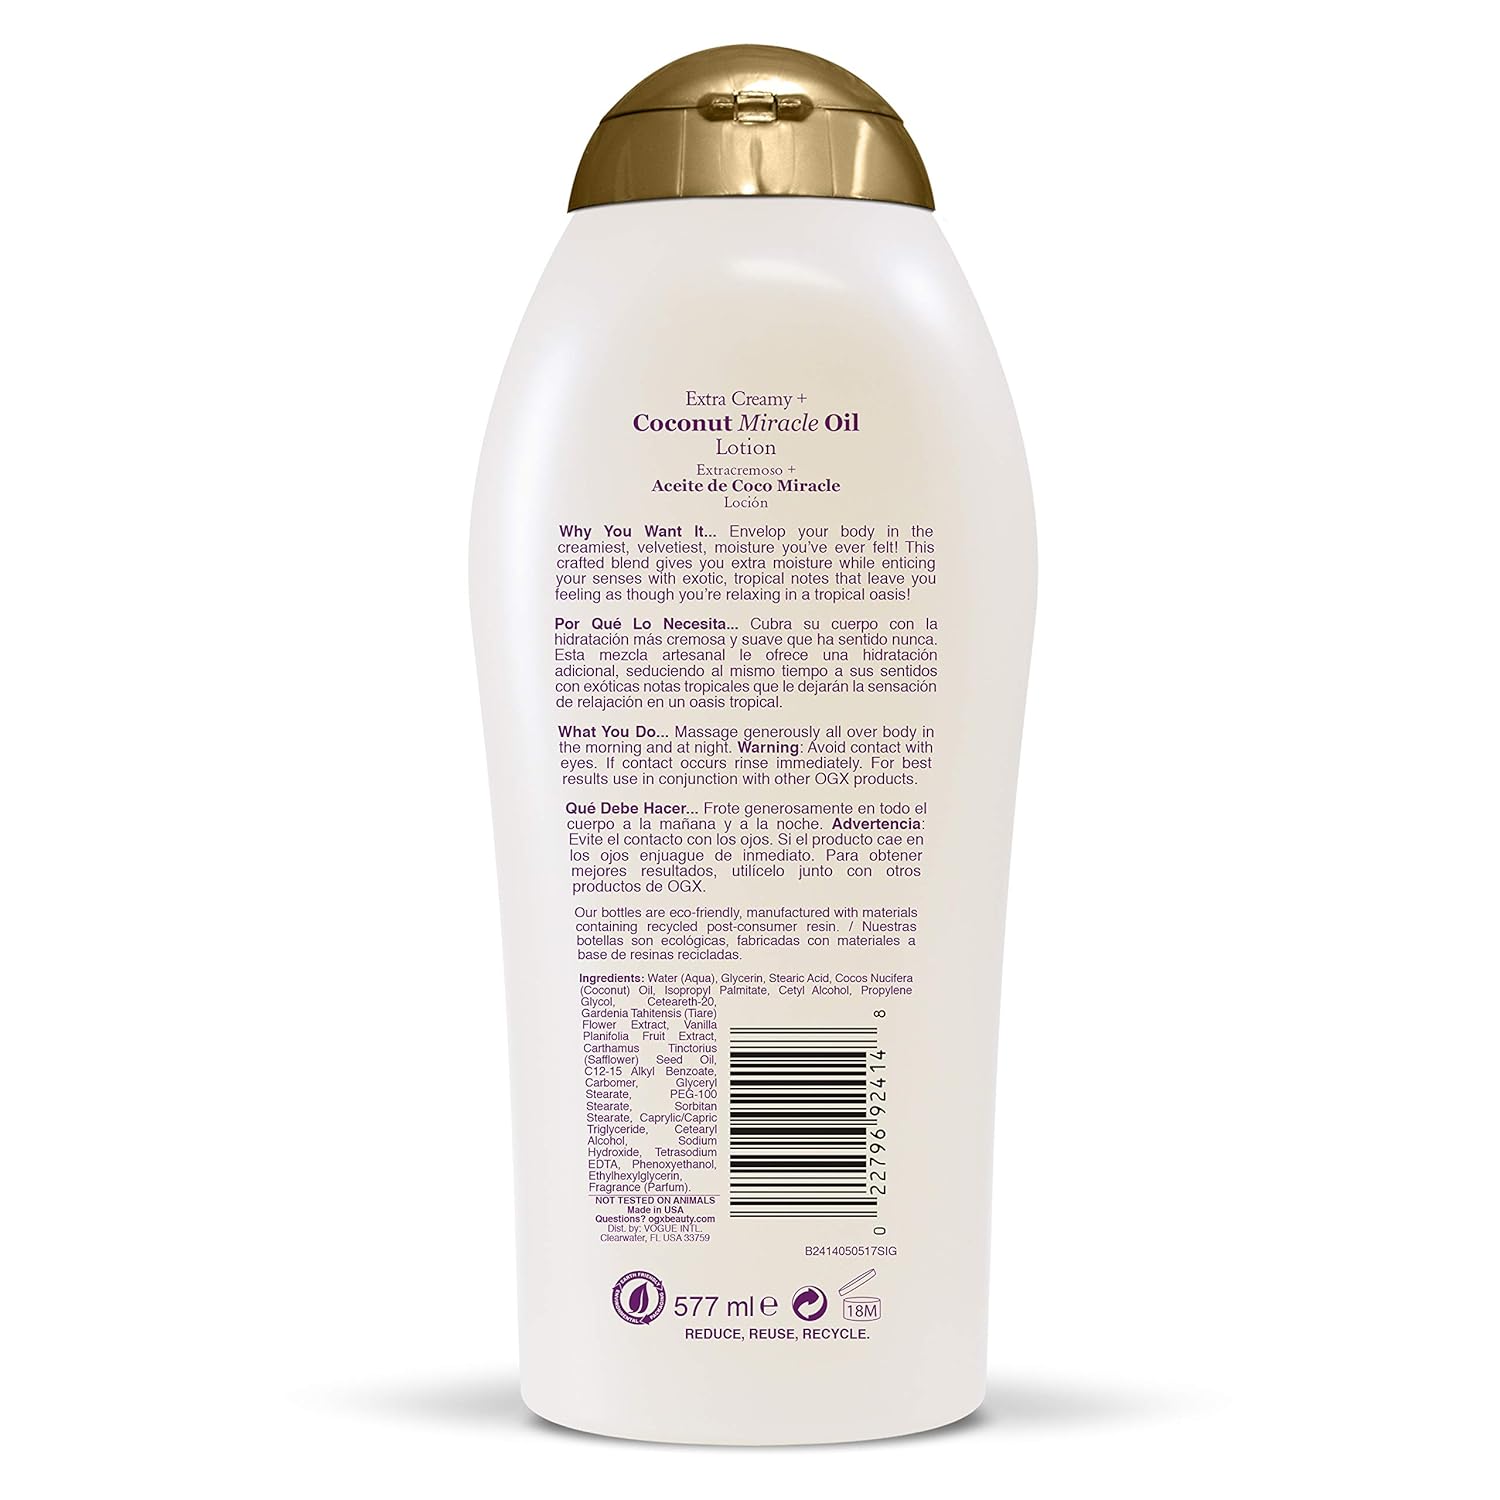 OGX Extra Creamy + Coconut Miracle Oil Ultra Moisture Body Lotion with Vanilla Bean, Fast-Absorbing Lotion for All Skin Types, Paraben-Free and Sulfated-Surfactants Free, 19.5 fl oz : Beauty & Personal Care